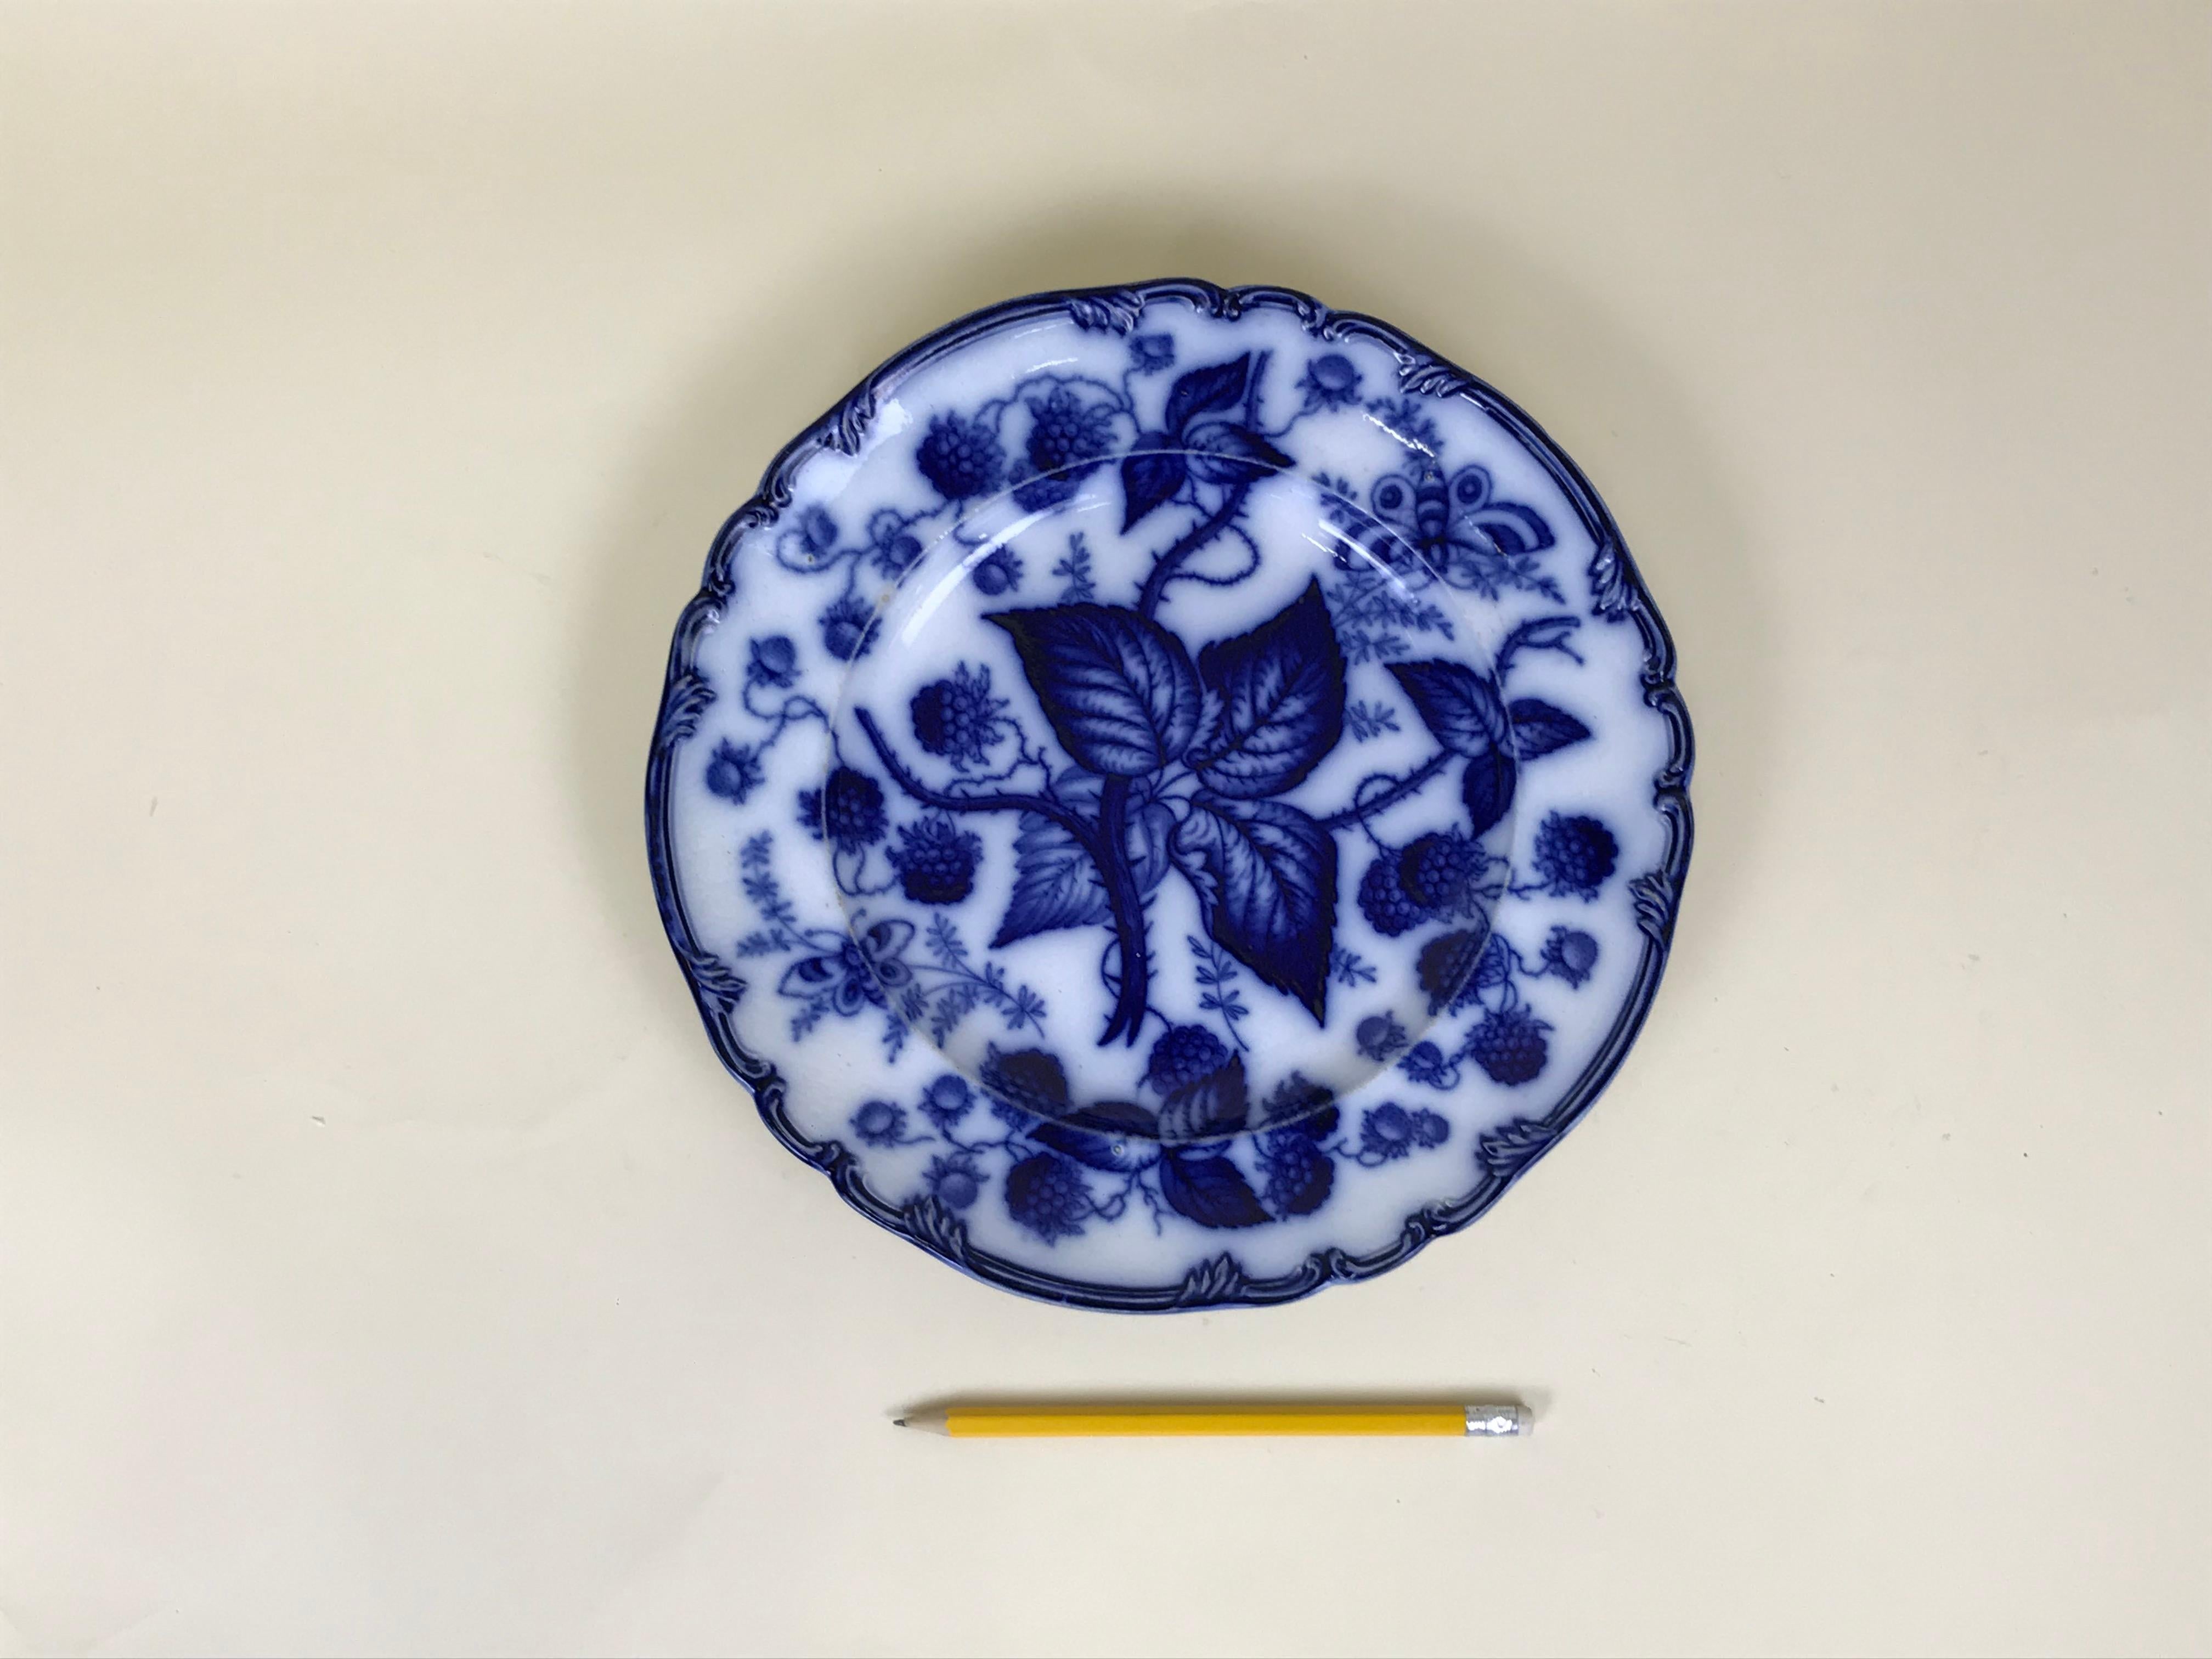 Earthenware dinner plate, made in Staffordshire in circa 1880.
Printed with flow blue naturalistic pattern of berries and butterfly. In excellent condition; no chips, cracks, restoration or signs of wear. Marked upper case BERRY.